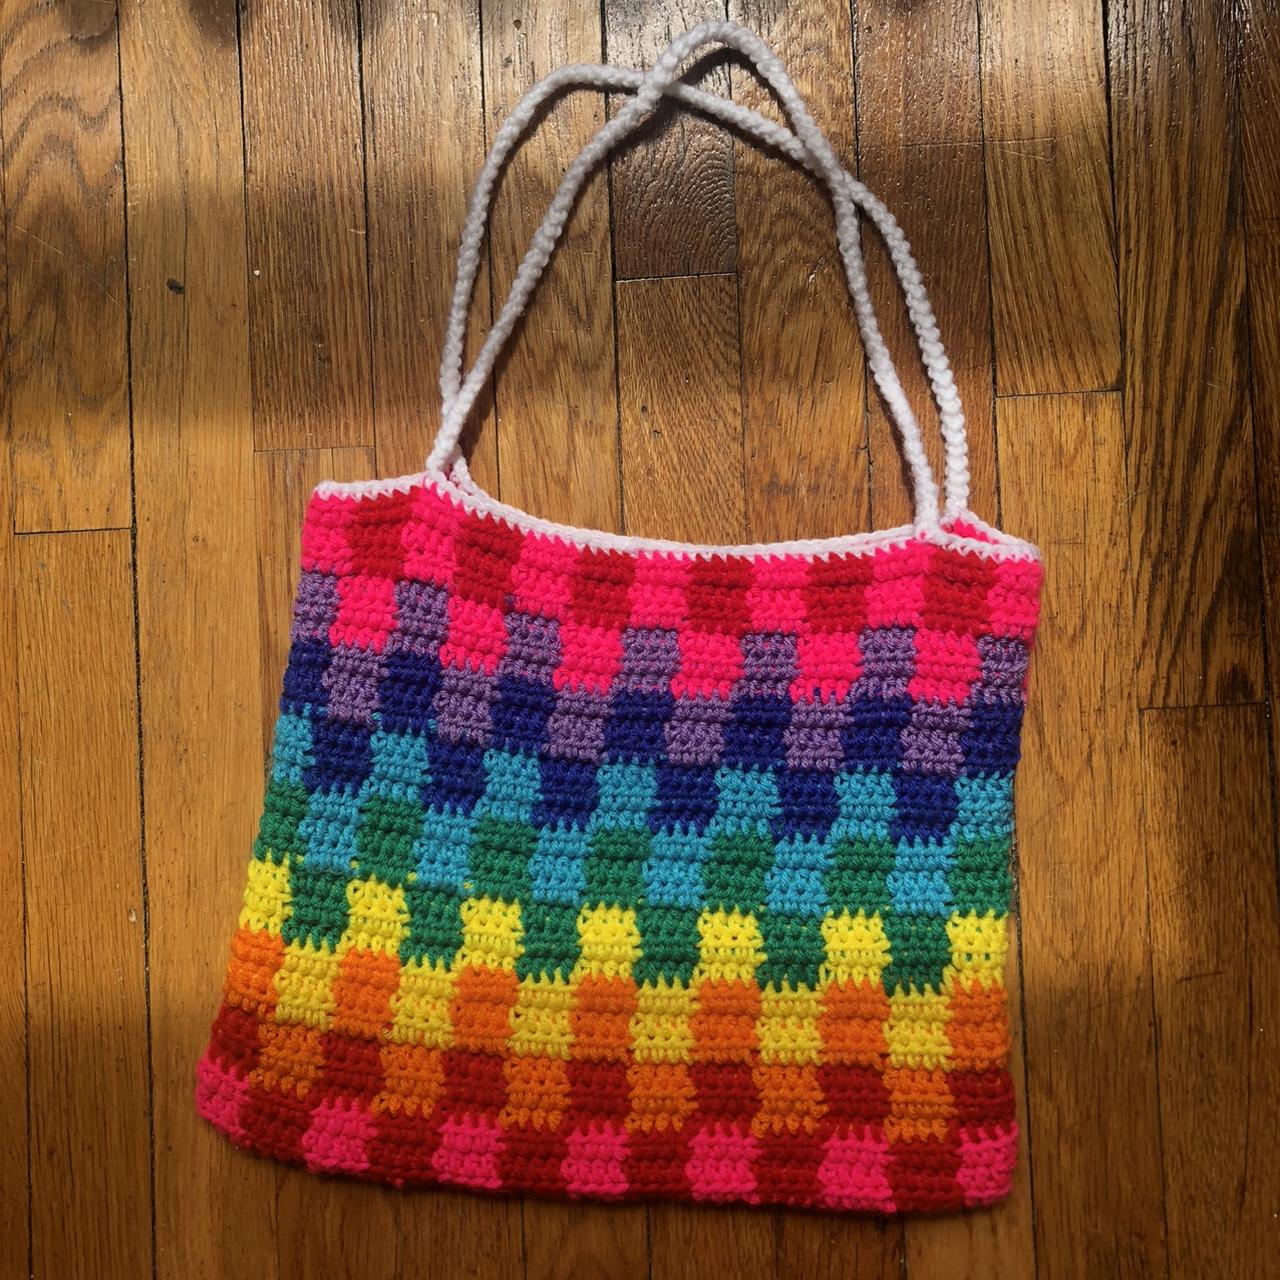 Crochet bag, Rainbow bag, Pattern No14, in both UK and US crochet terms